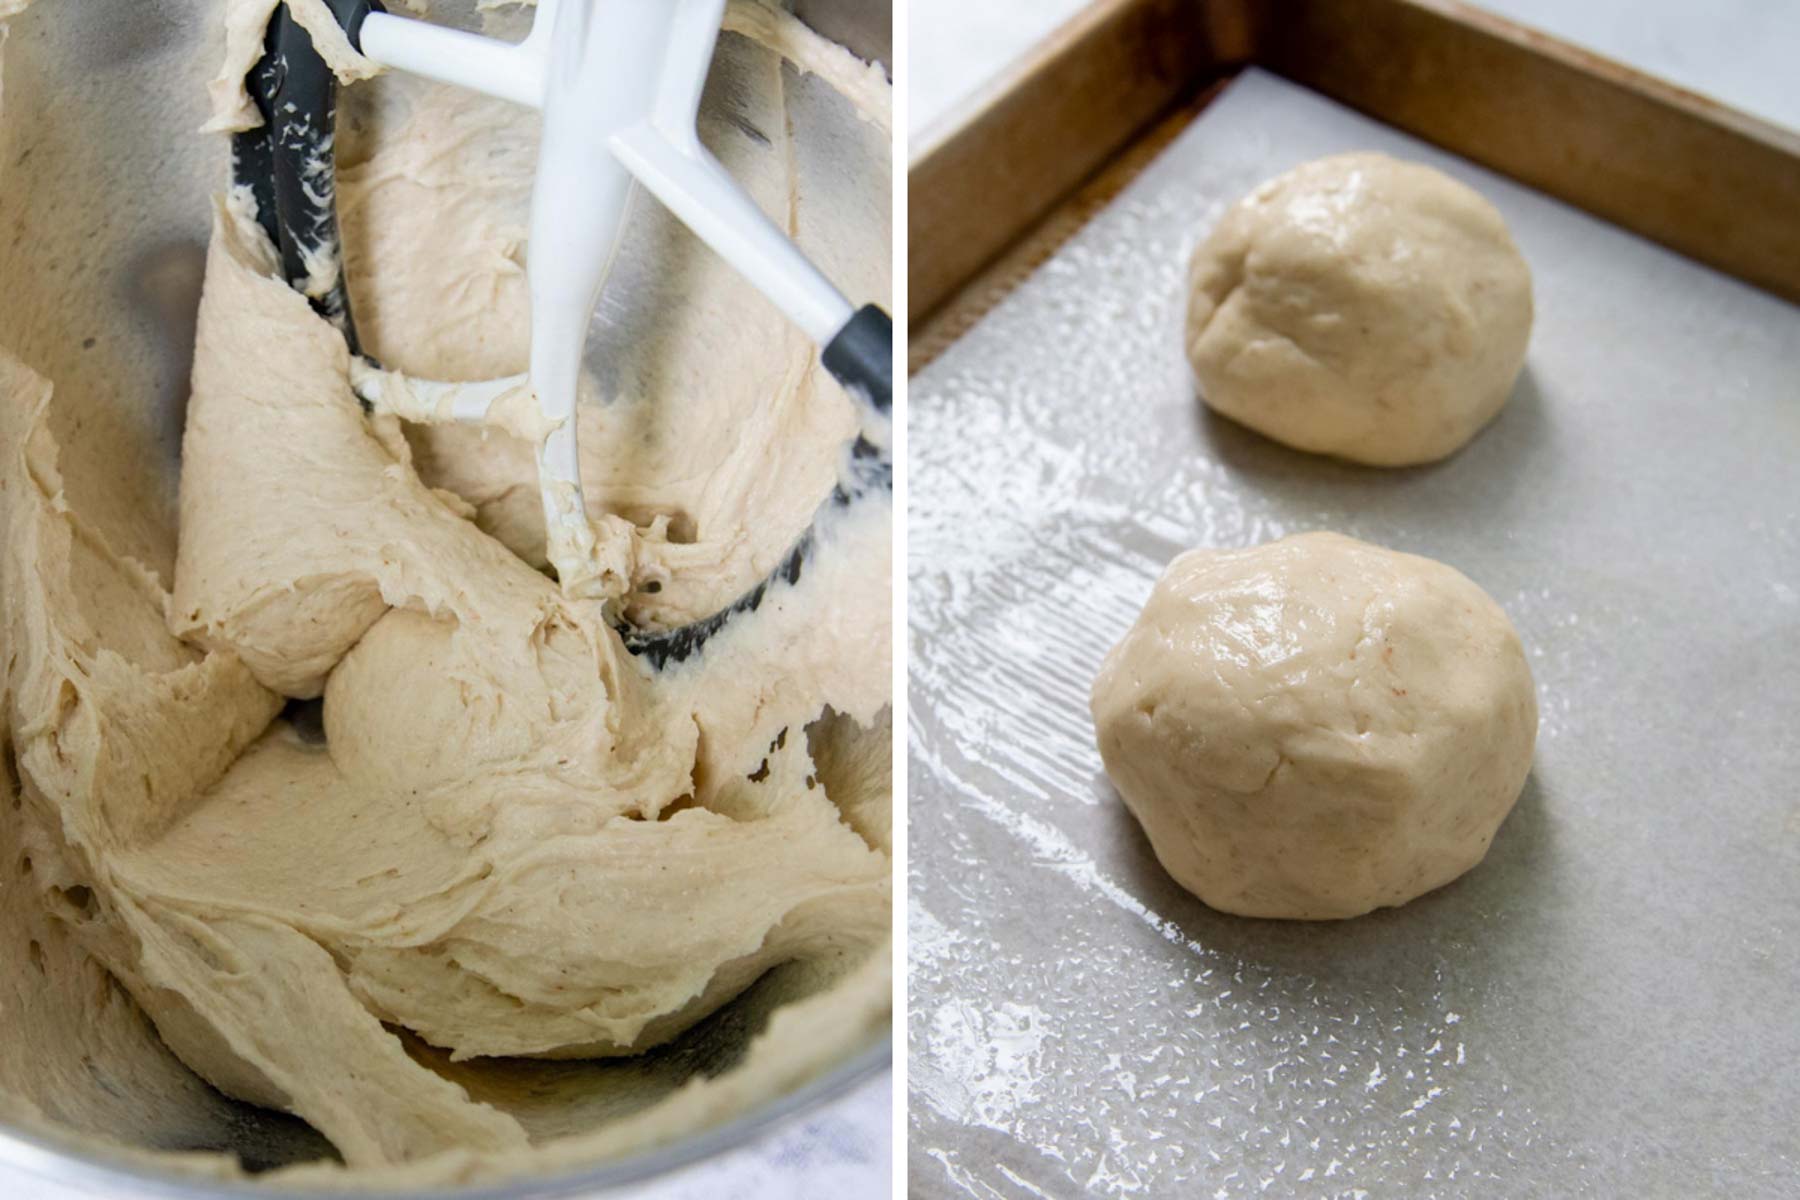 images showing how to make the dough and shape it.